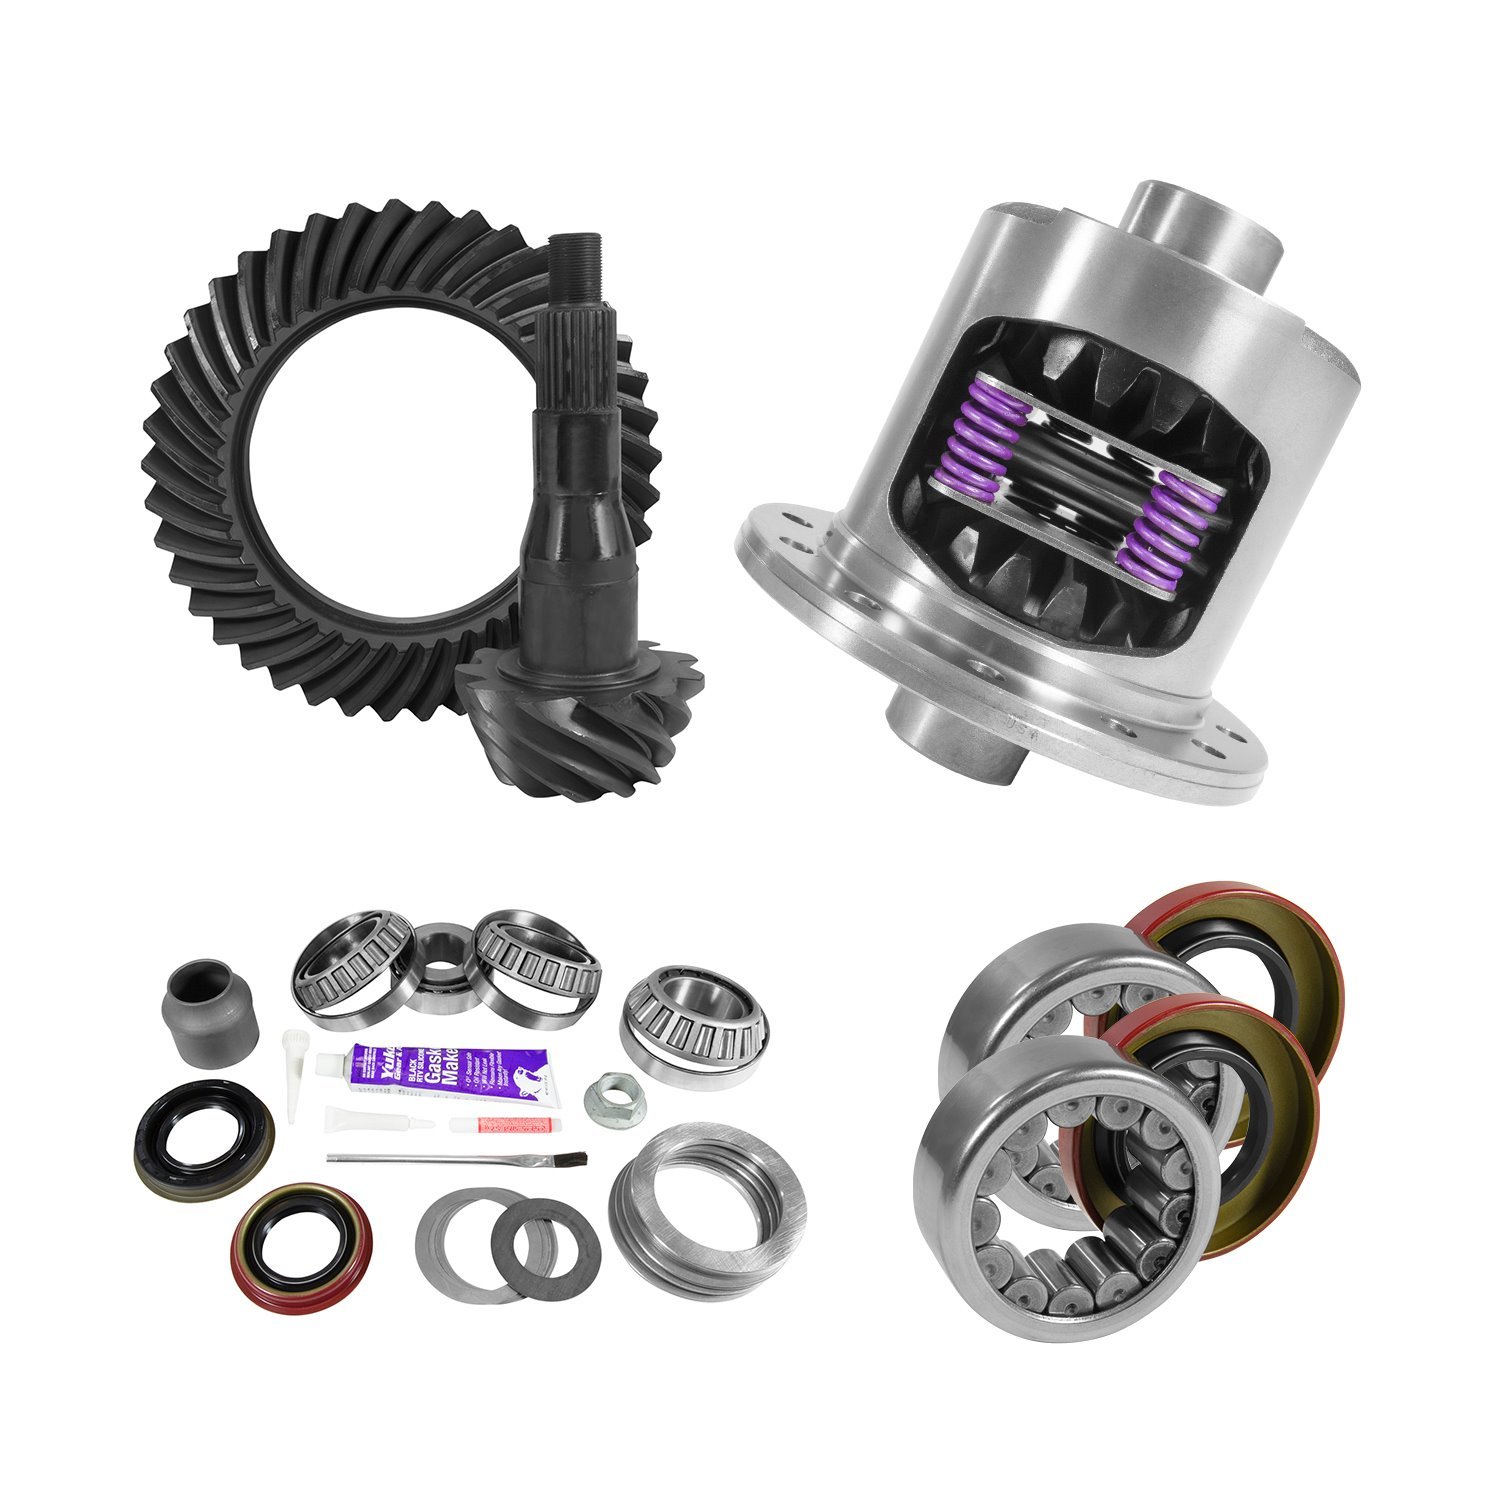 USA Standard 10809 9.75 in. Ford 3.73 Rear Ring & Pinion Install Kit, 34Spl Posi, 2.99 in. Axle Bearing